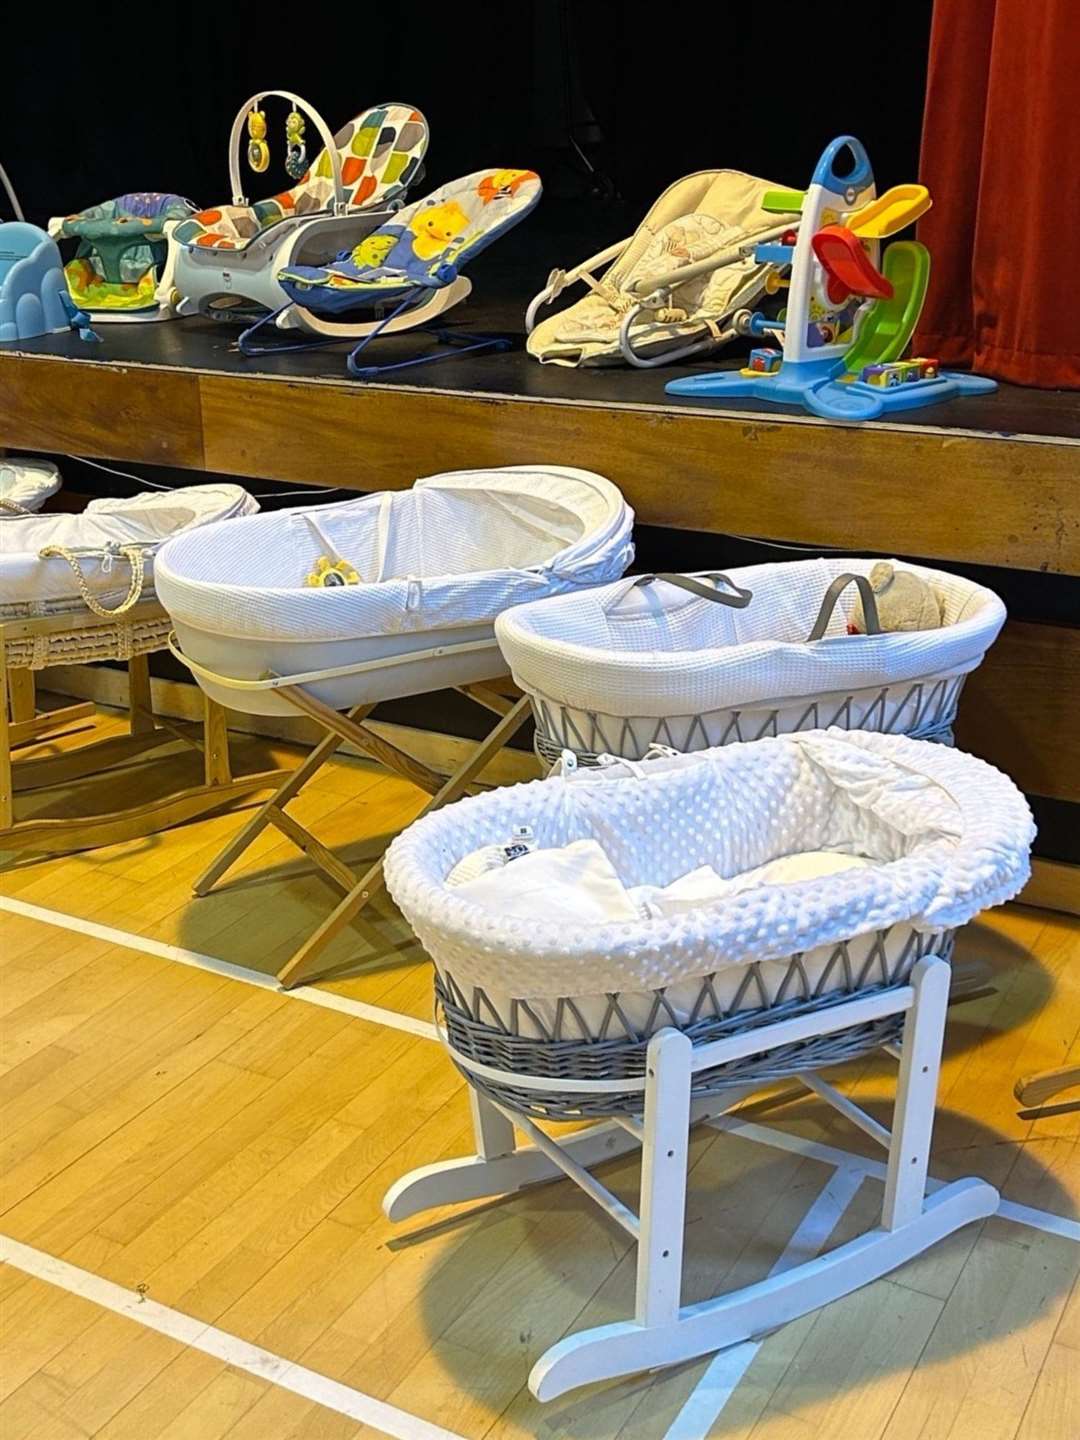 Expensive items including cots were on offer at the last open day.